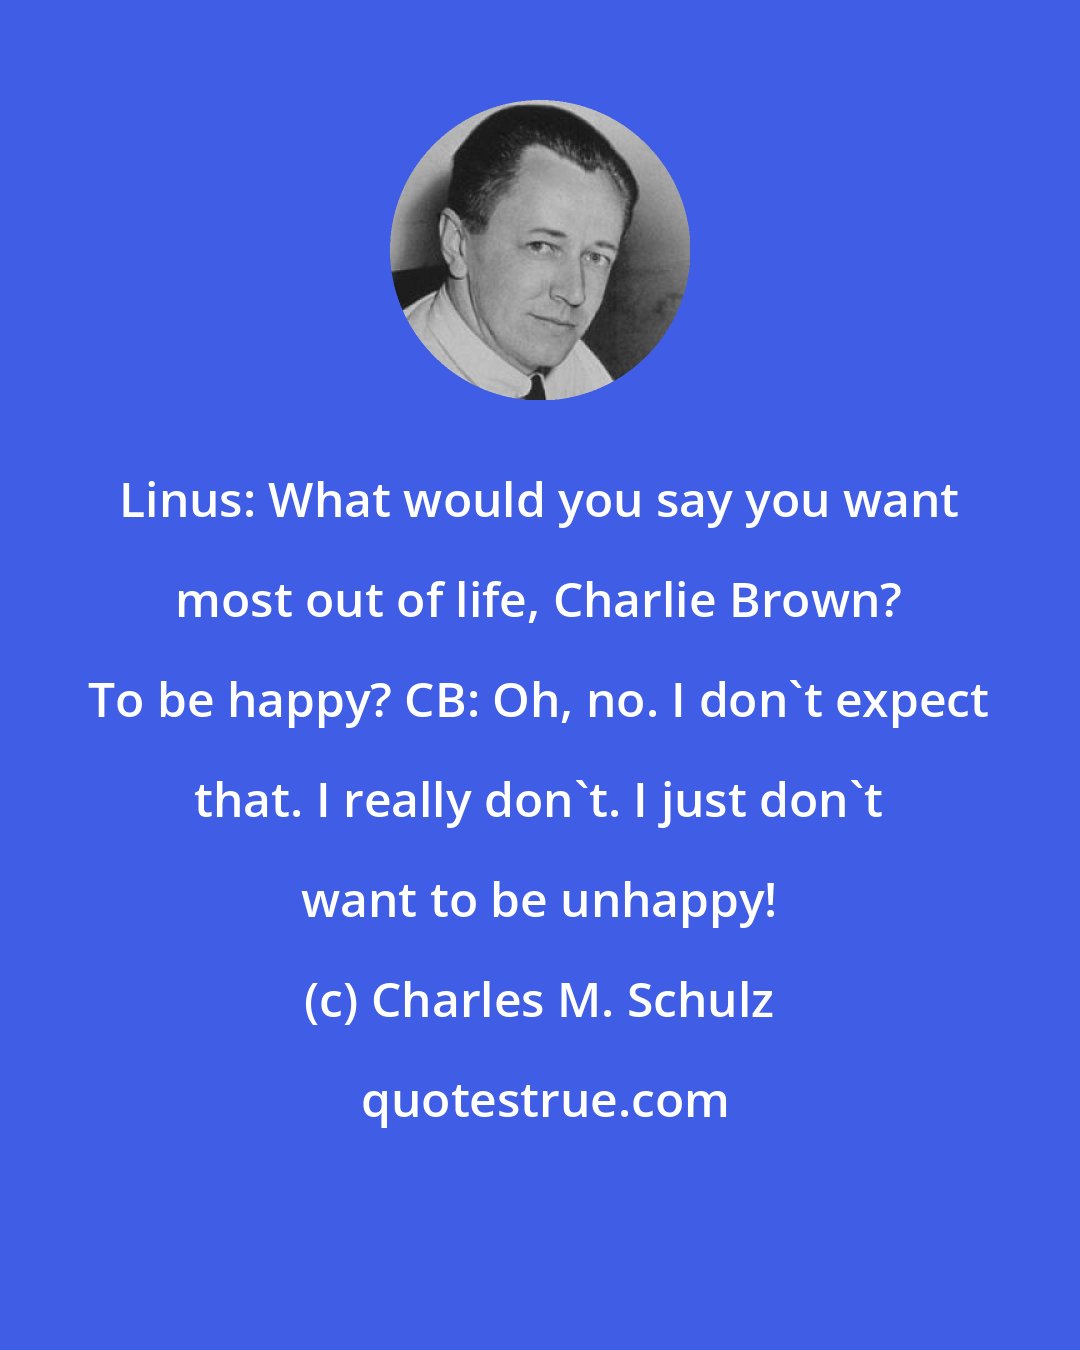 Charles M. Schulz: Linus: What would you say you want most out of life, Charlie Brown? To be happy? CB: Oh, no. I don't expect that. I really don't. I just don't want to be unhappy!